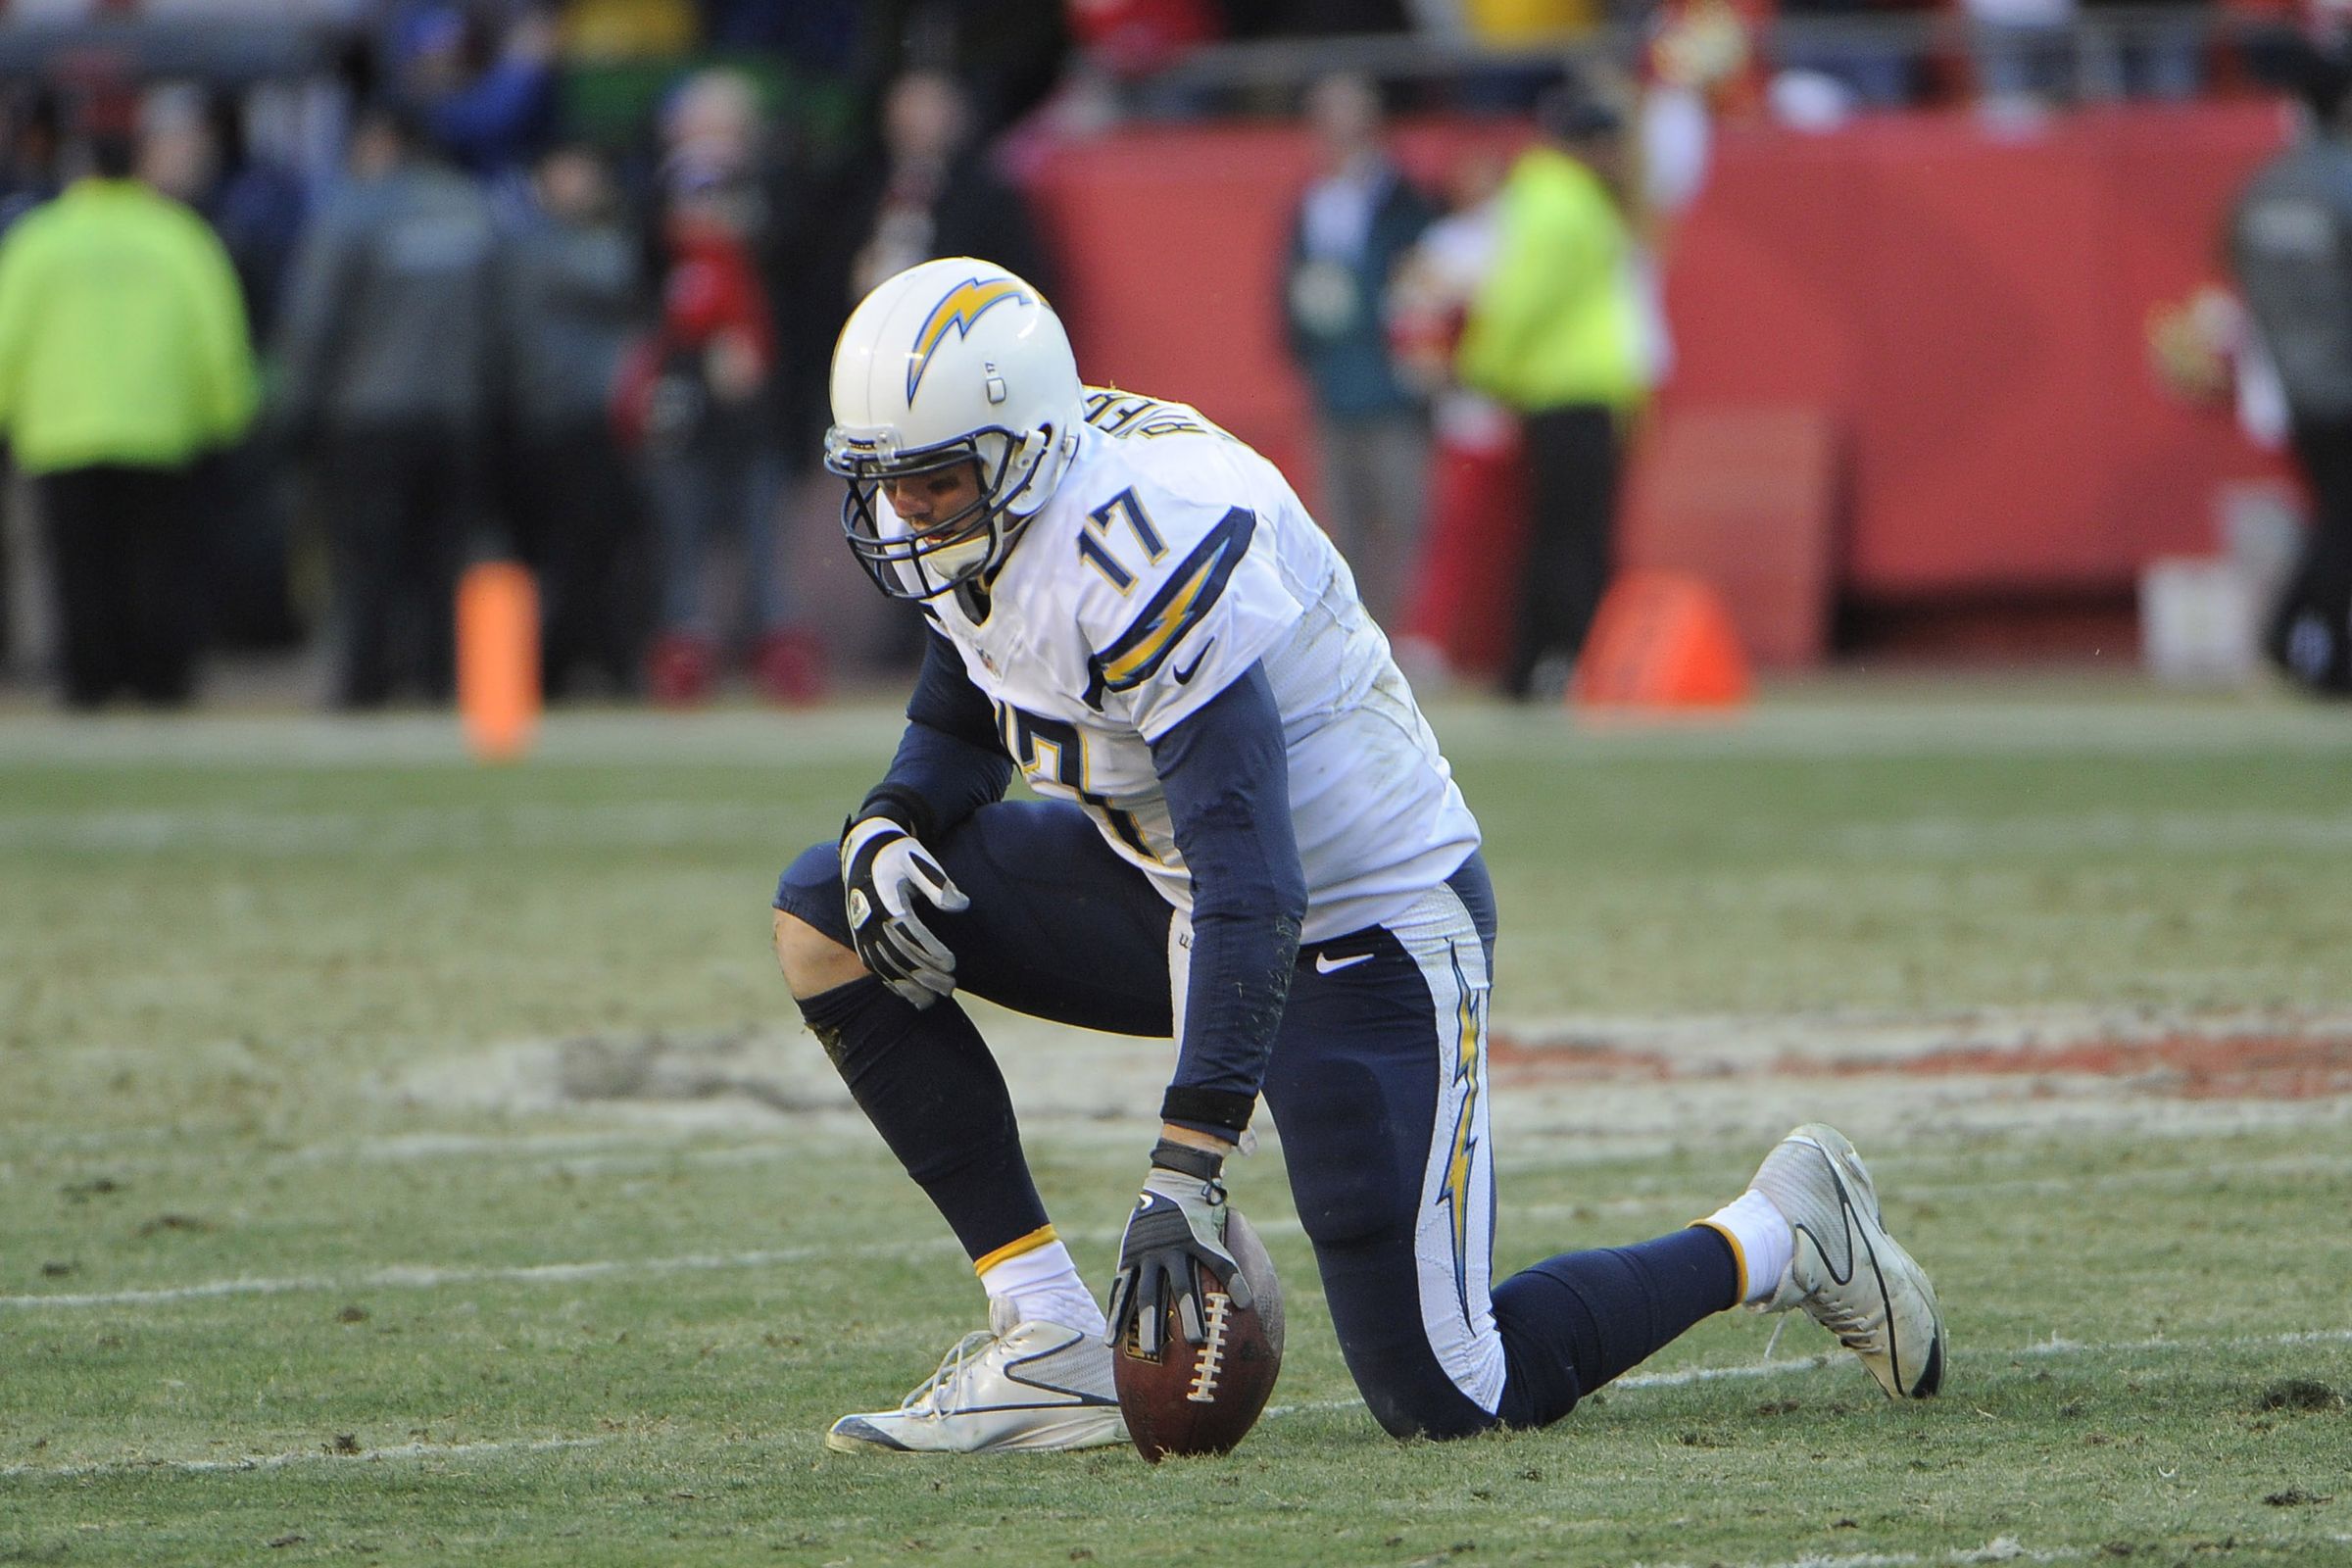 Sports Los Angeles Chargers HD Wallpaper | Background Image